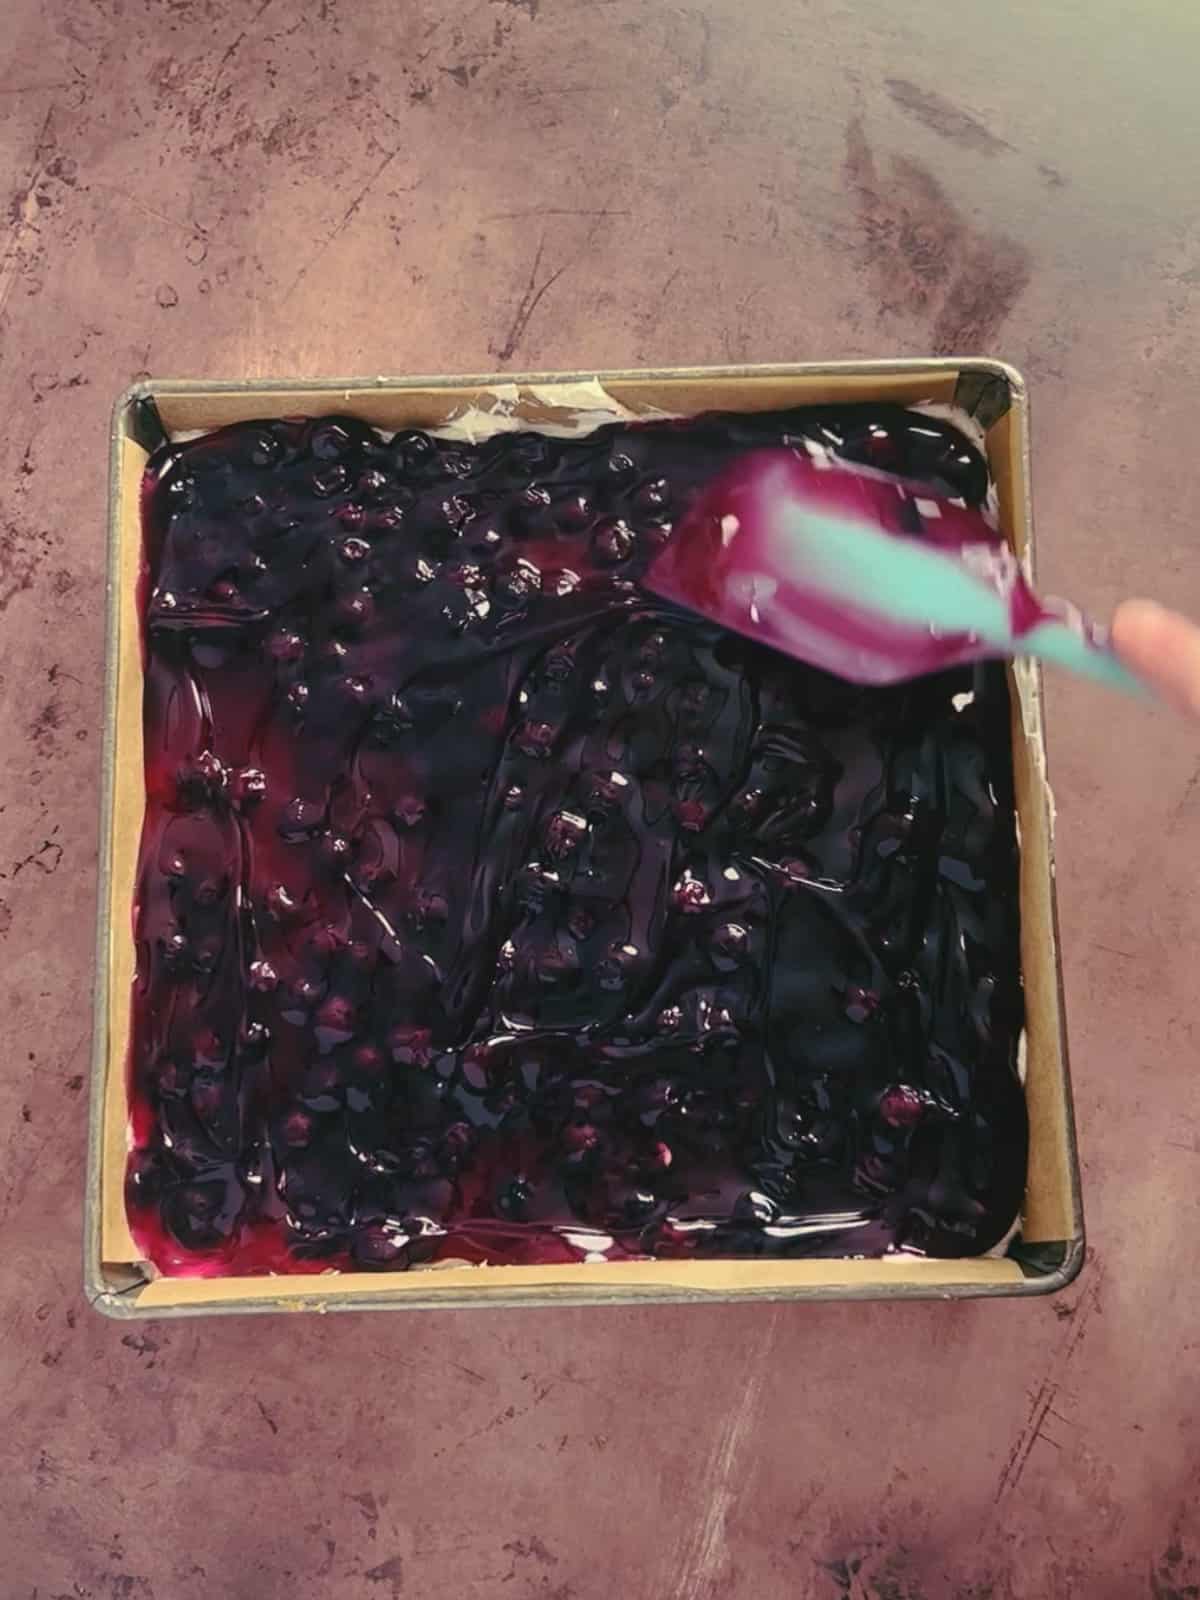 blueberry pie filling being spread across the top.